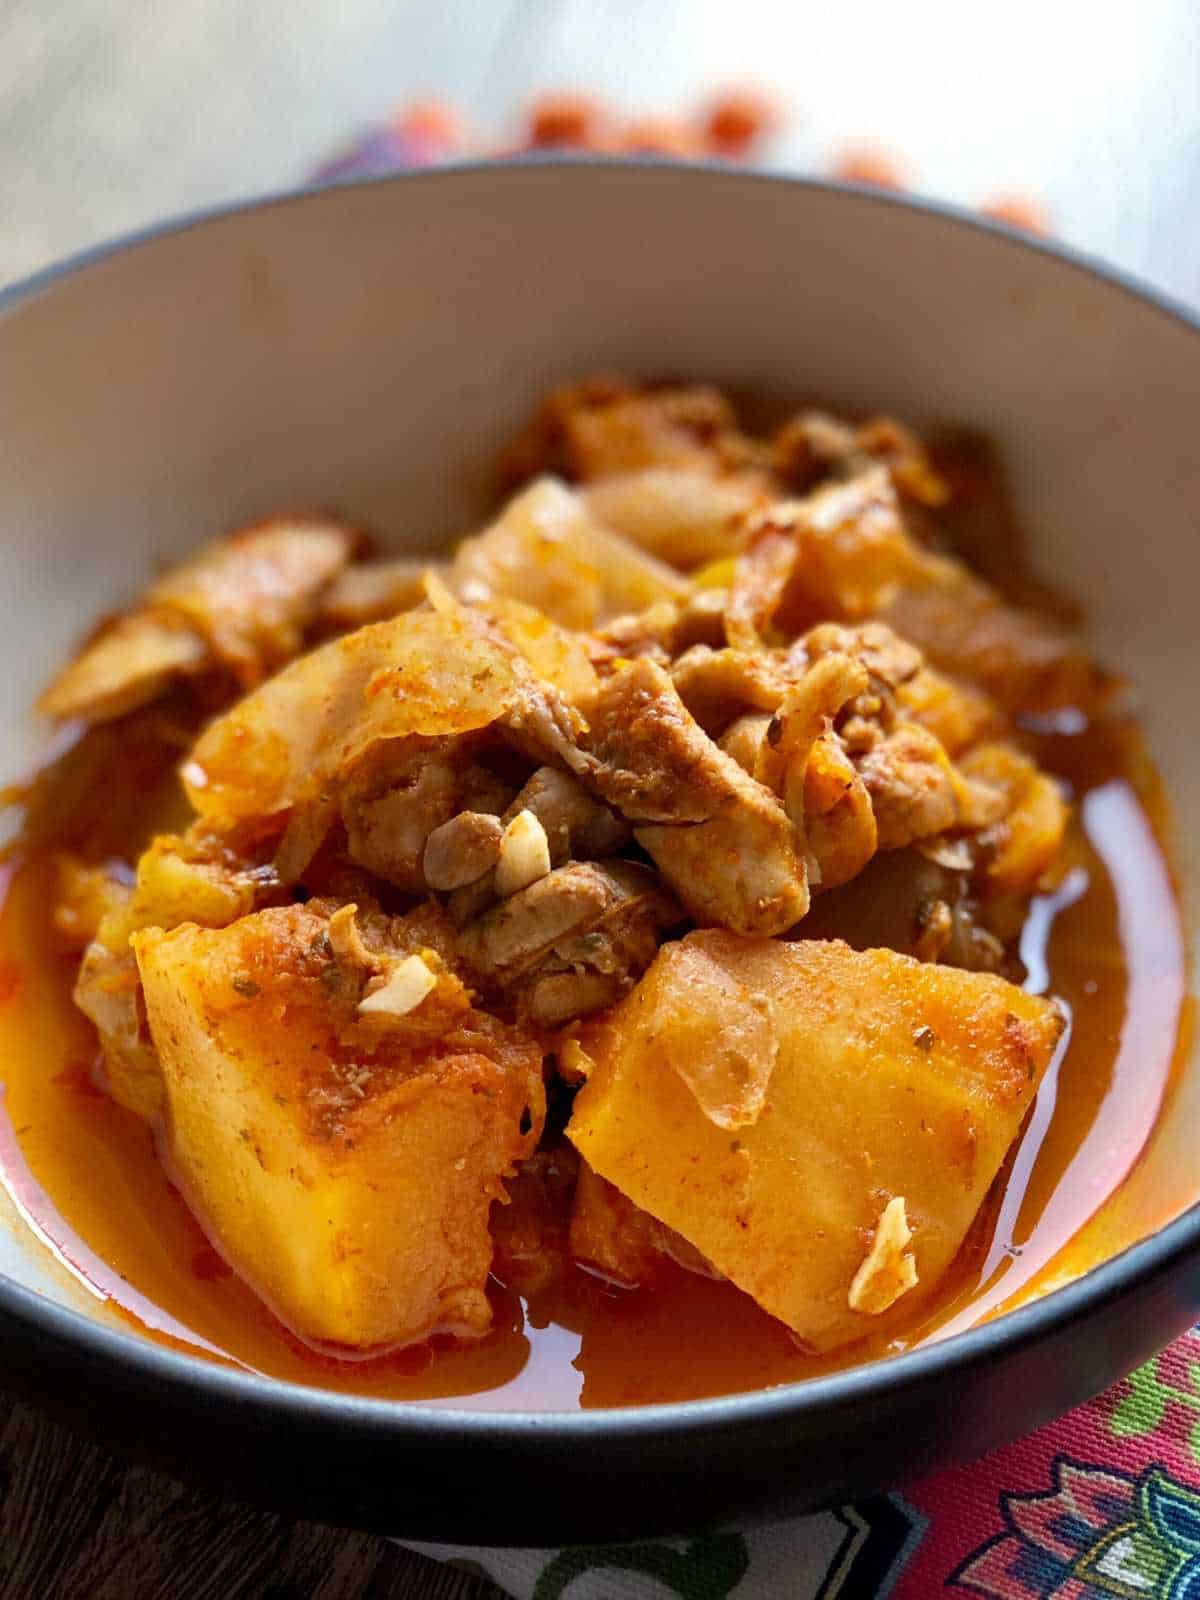 Photo of the chicken and butternut squash served in a bowl, seen close up